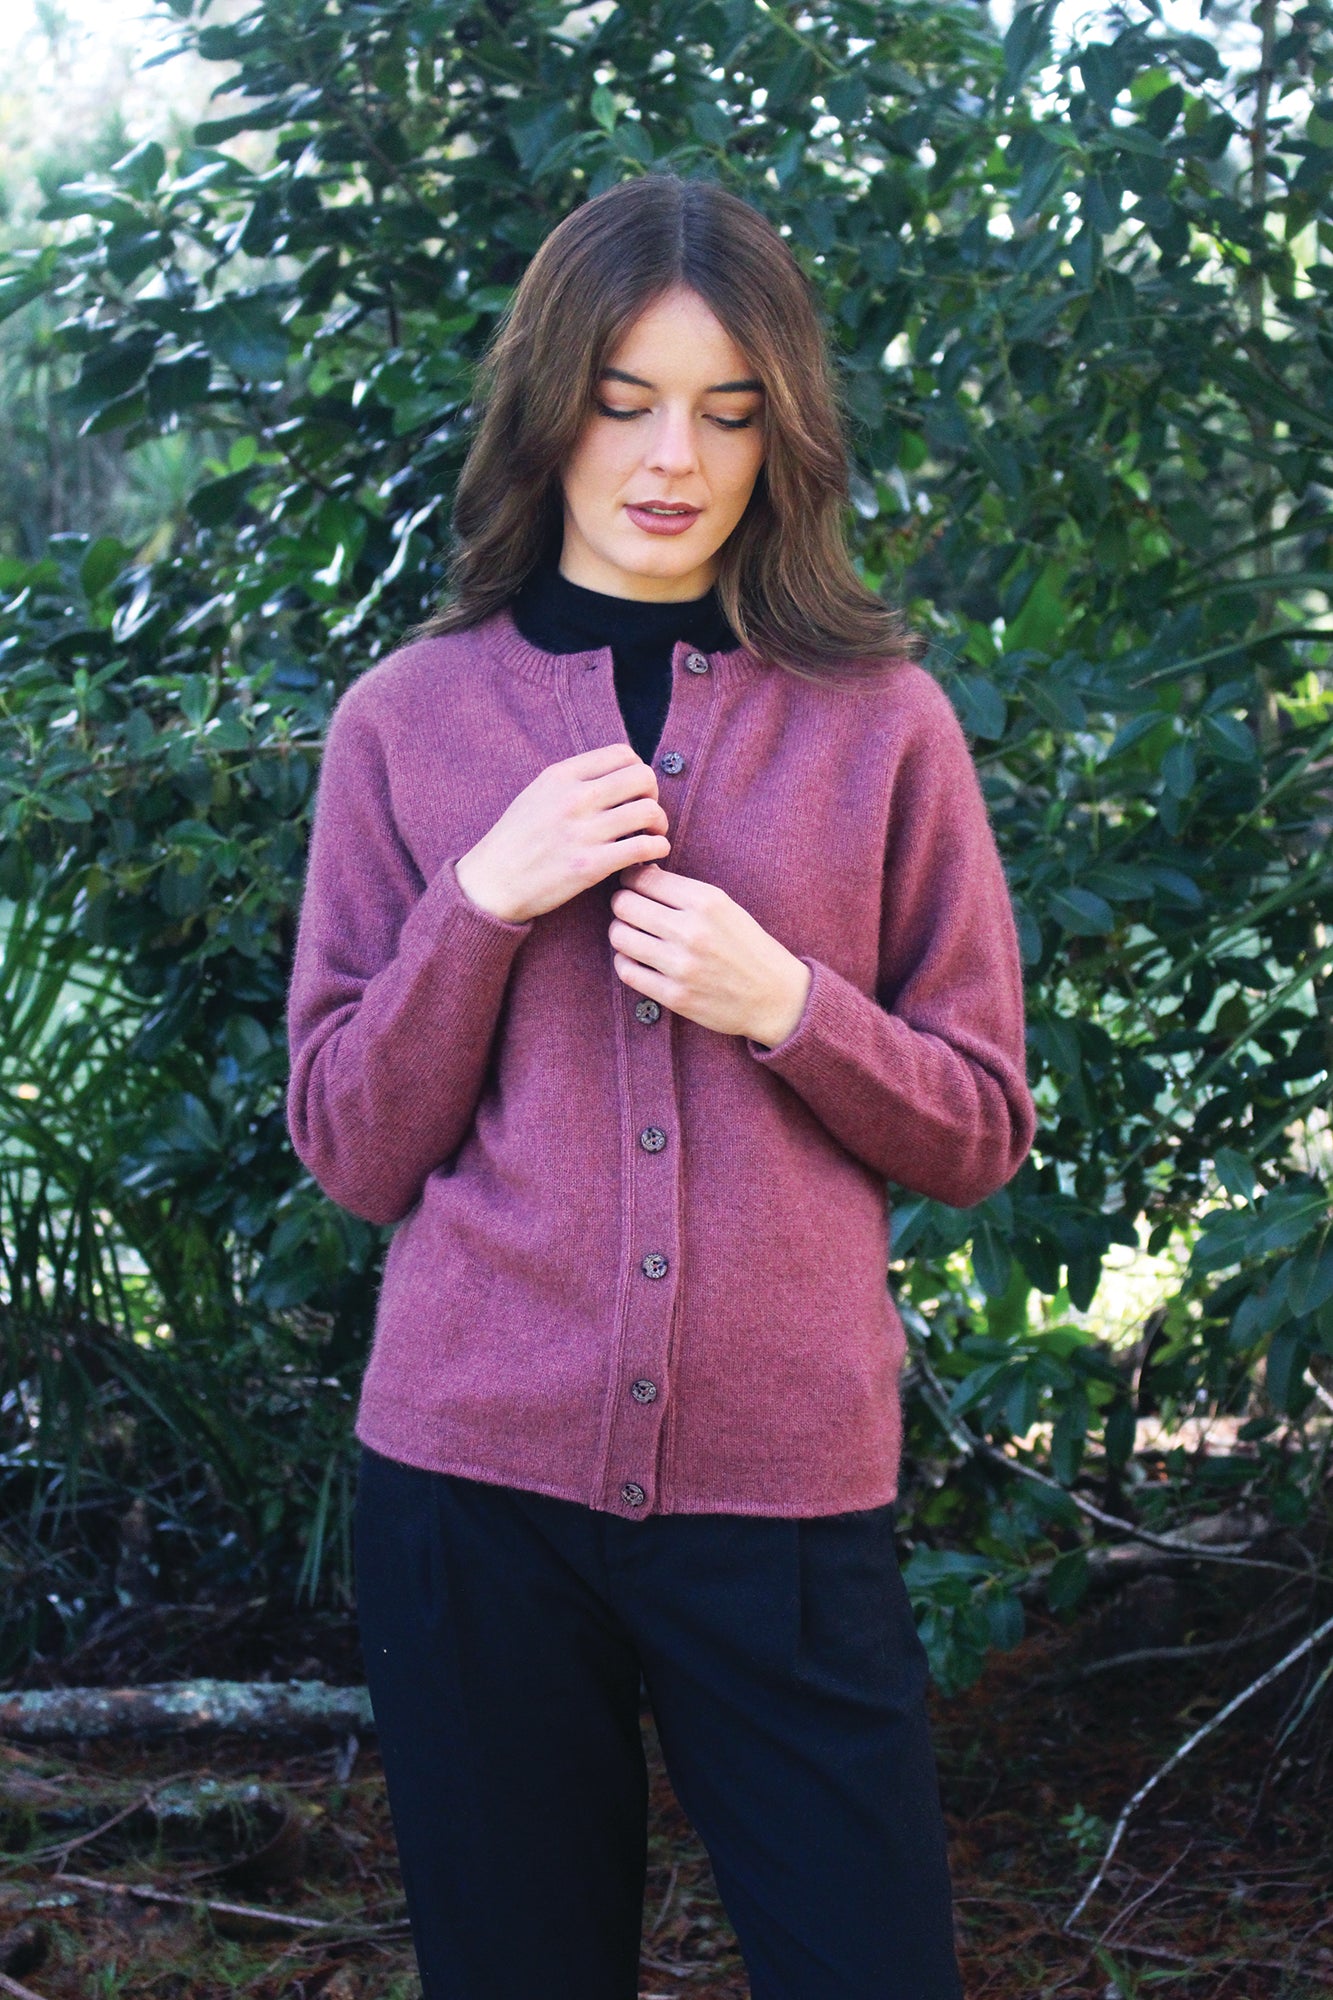 A timeless crew neck, button through cardigan. Great for layering up. Wear open or buttoned up as a top layer. A possum merino blend available in sizes XS - XXL. Made in NZ by Lothlorian. NOTE: * after colour denotes a custom colour to our store, not always readily available. Orchid.